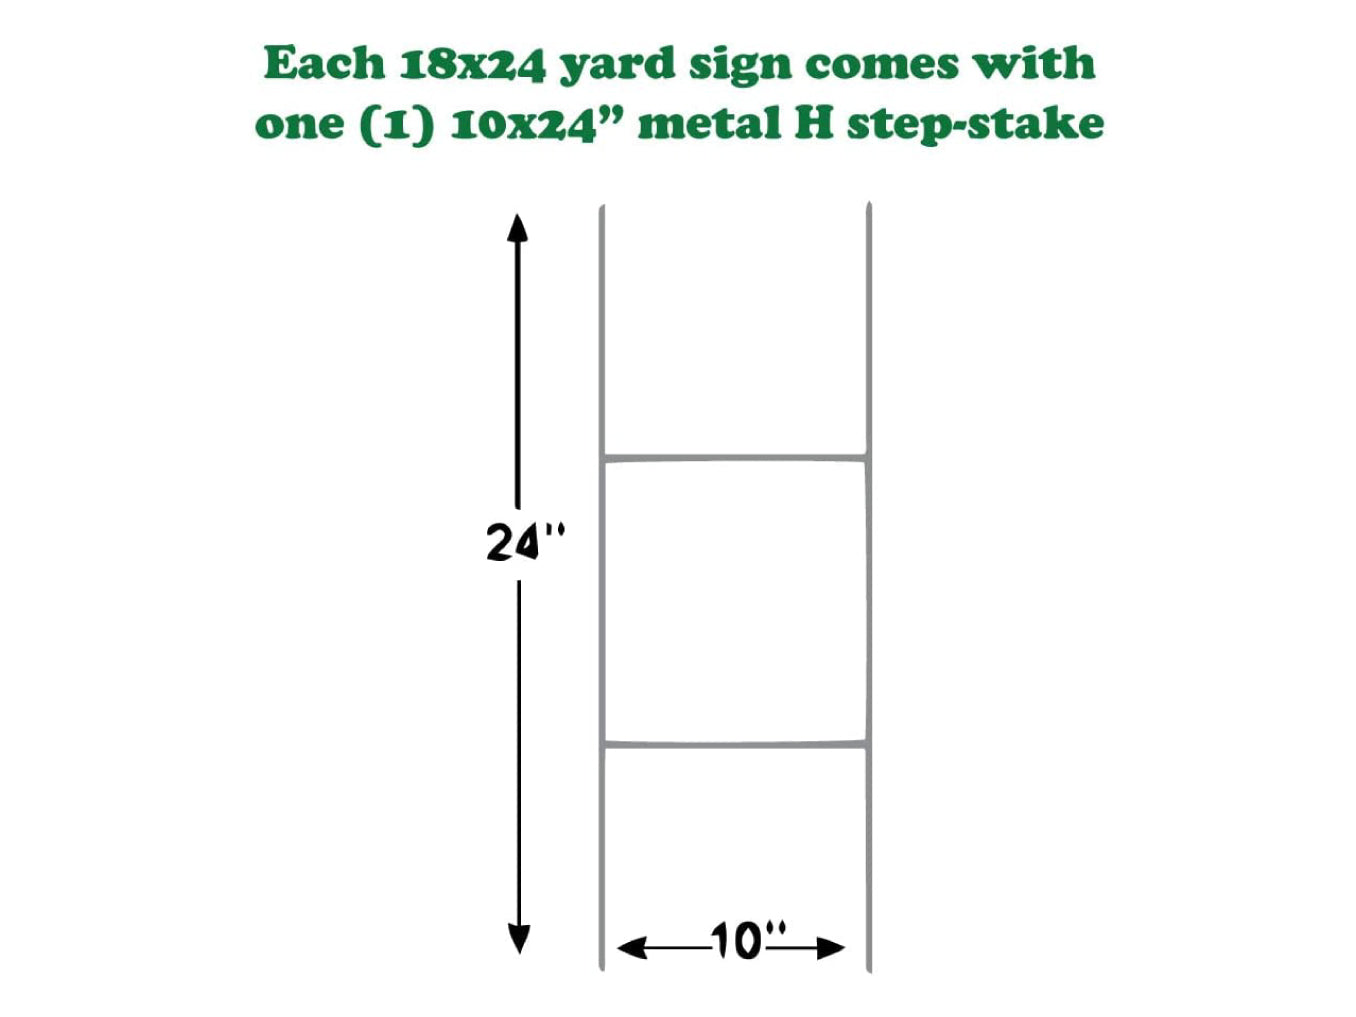 Community Garage Sale, Yard Sale Sign, 24x18 or 36x24 inch, Double Sided, H-Stake Included, v4